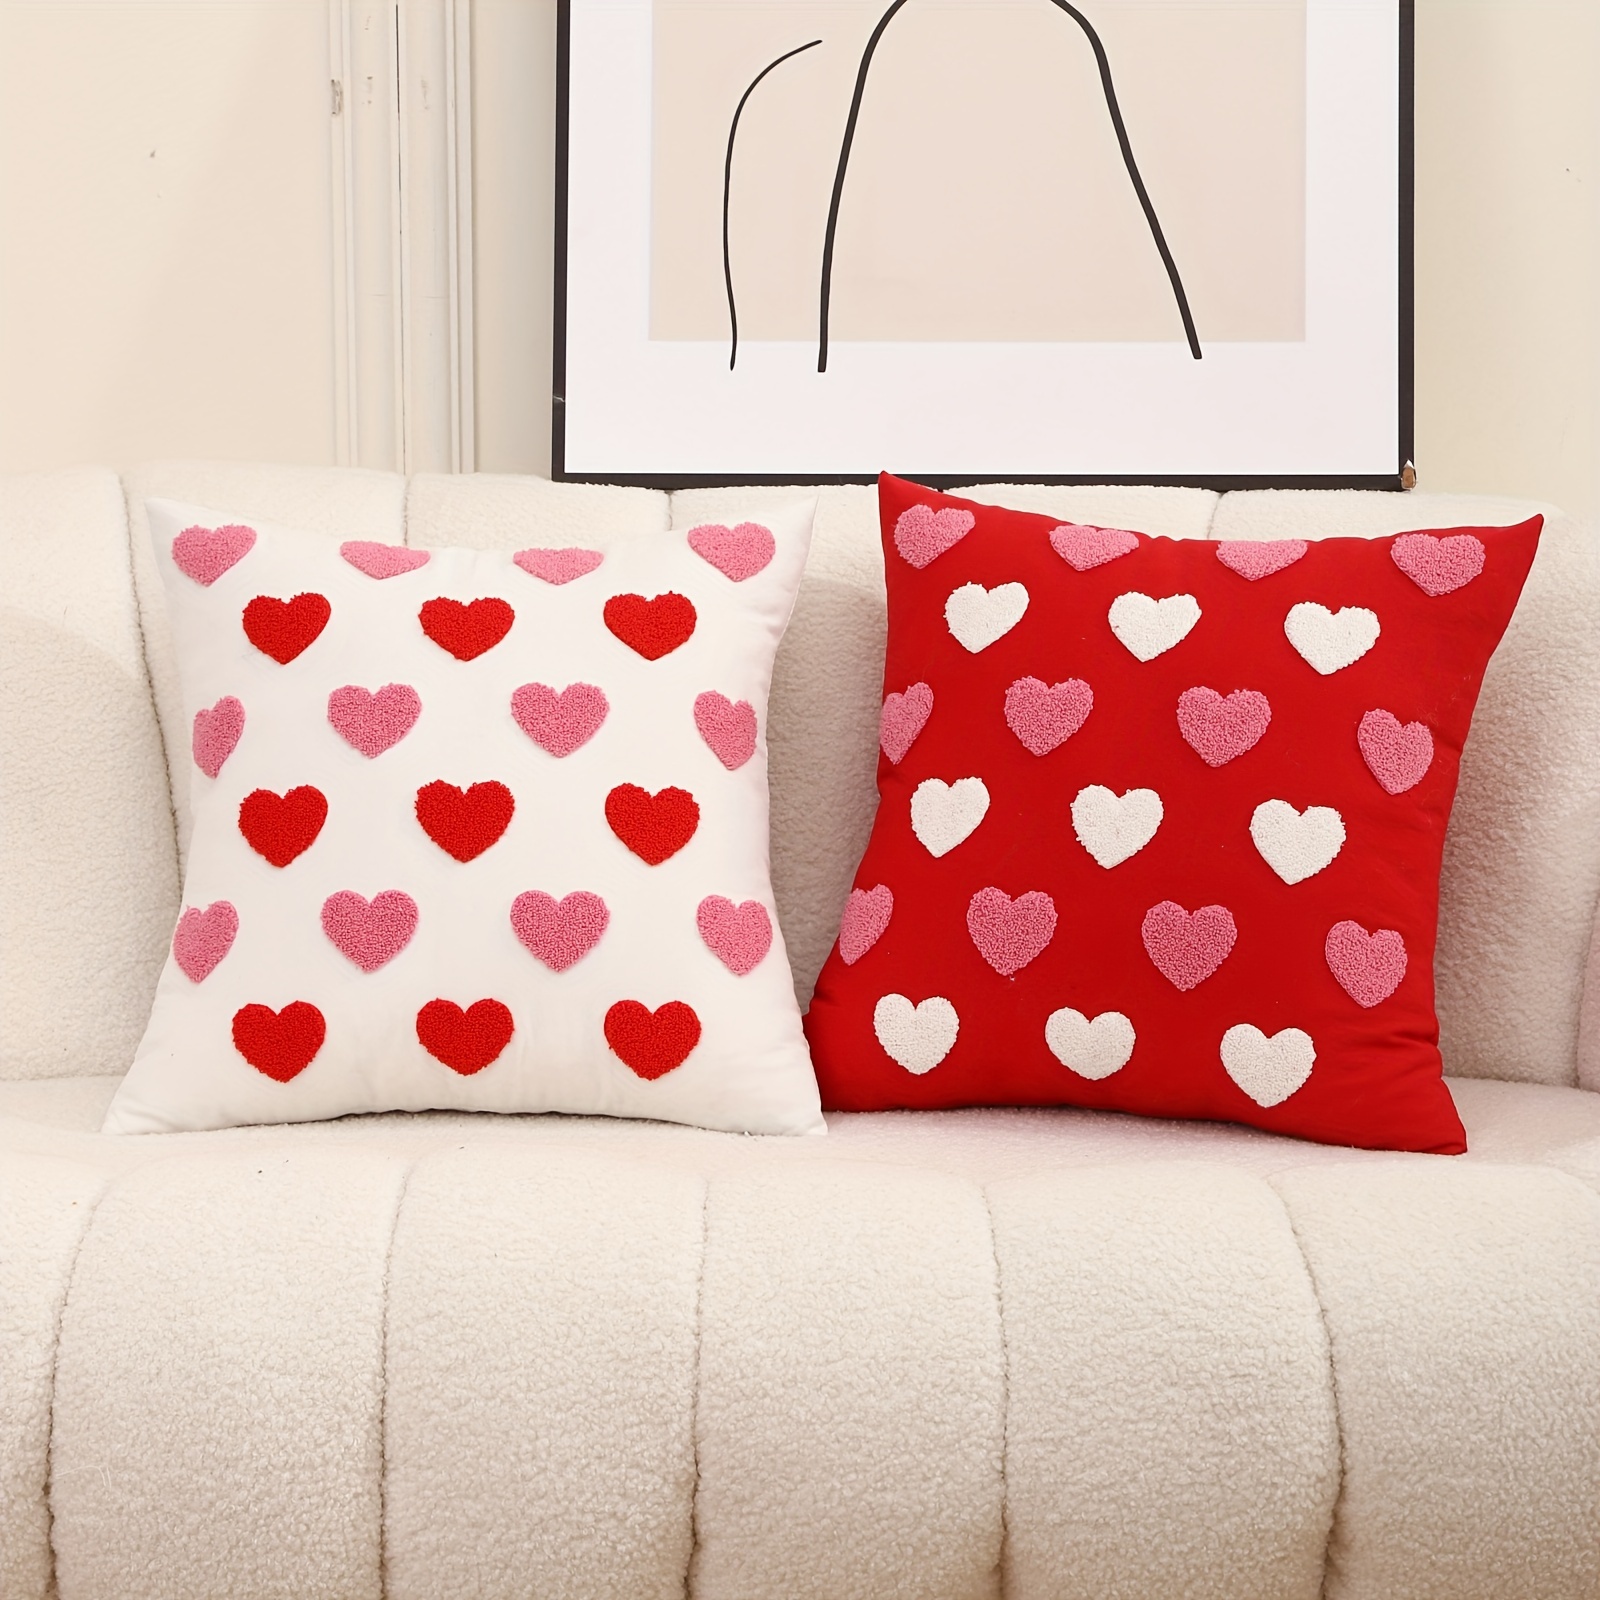  YOWMNS Cupid Velvet Decorative Pillows: Unique Patterned Pillow  Covers for Chairs and Couches, Set of 2 Throw Pillow Inserts, 16x16-20x20  Inches, Ideal for All Occasions : Home & Kitchen